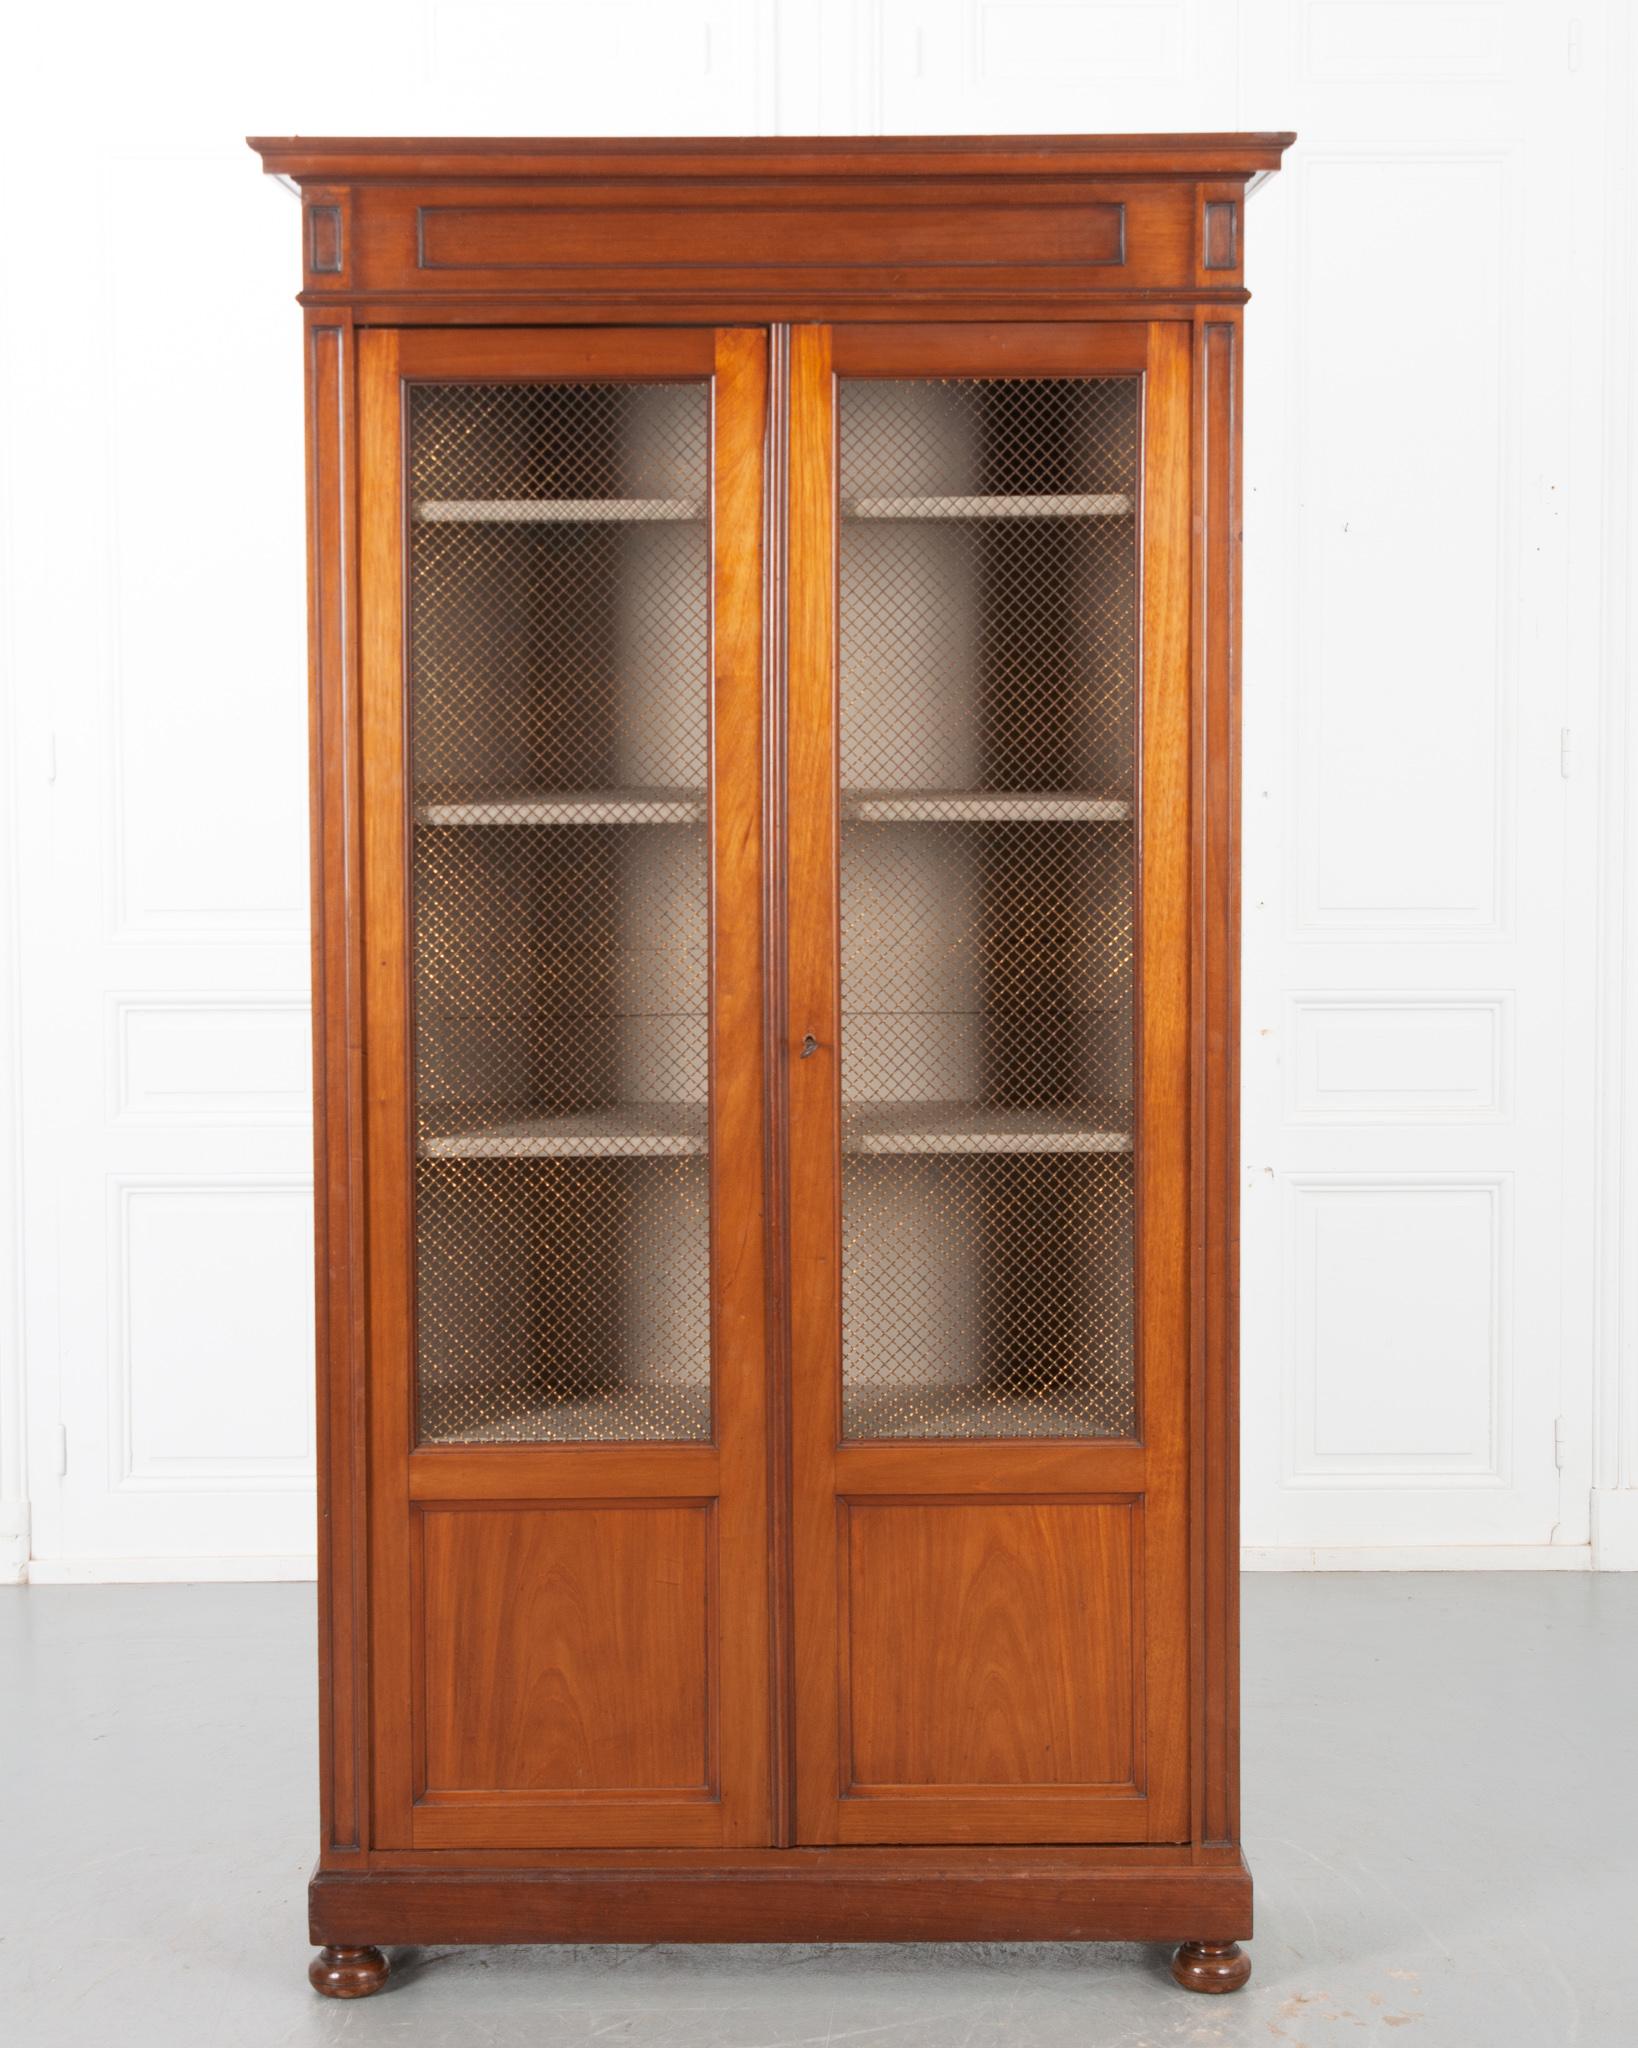 This handsome 19th century bibliotheque is the perfect combination of modern and antique! Designed with simplicity and function in mind, the cornice and paneling has minimal thumbnail carving. The richly patinated mahogany body compliments the worn